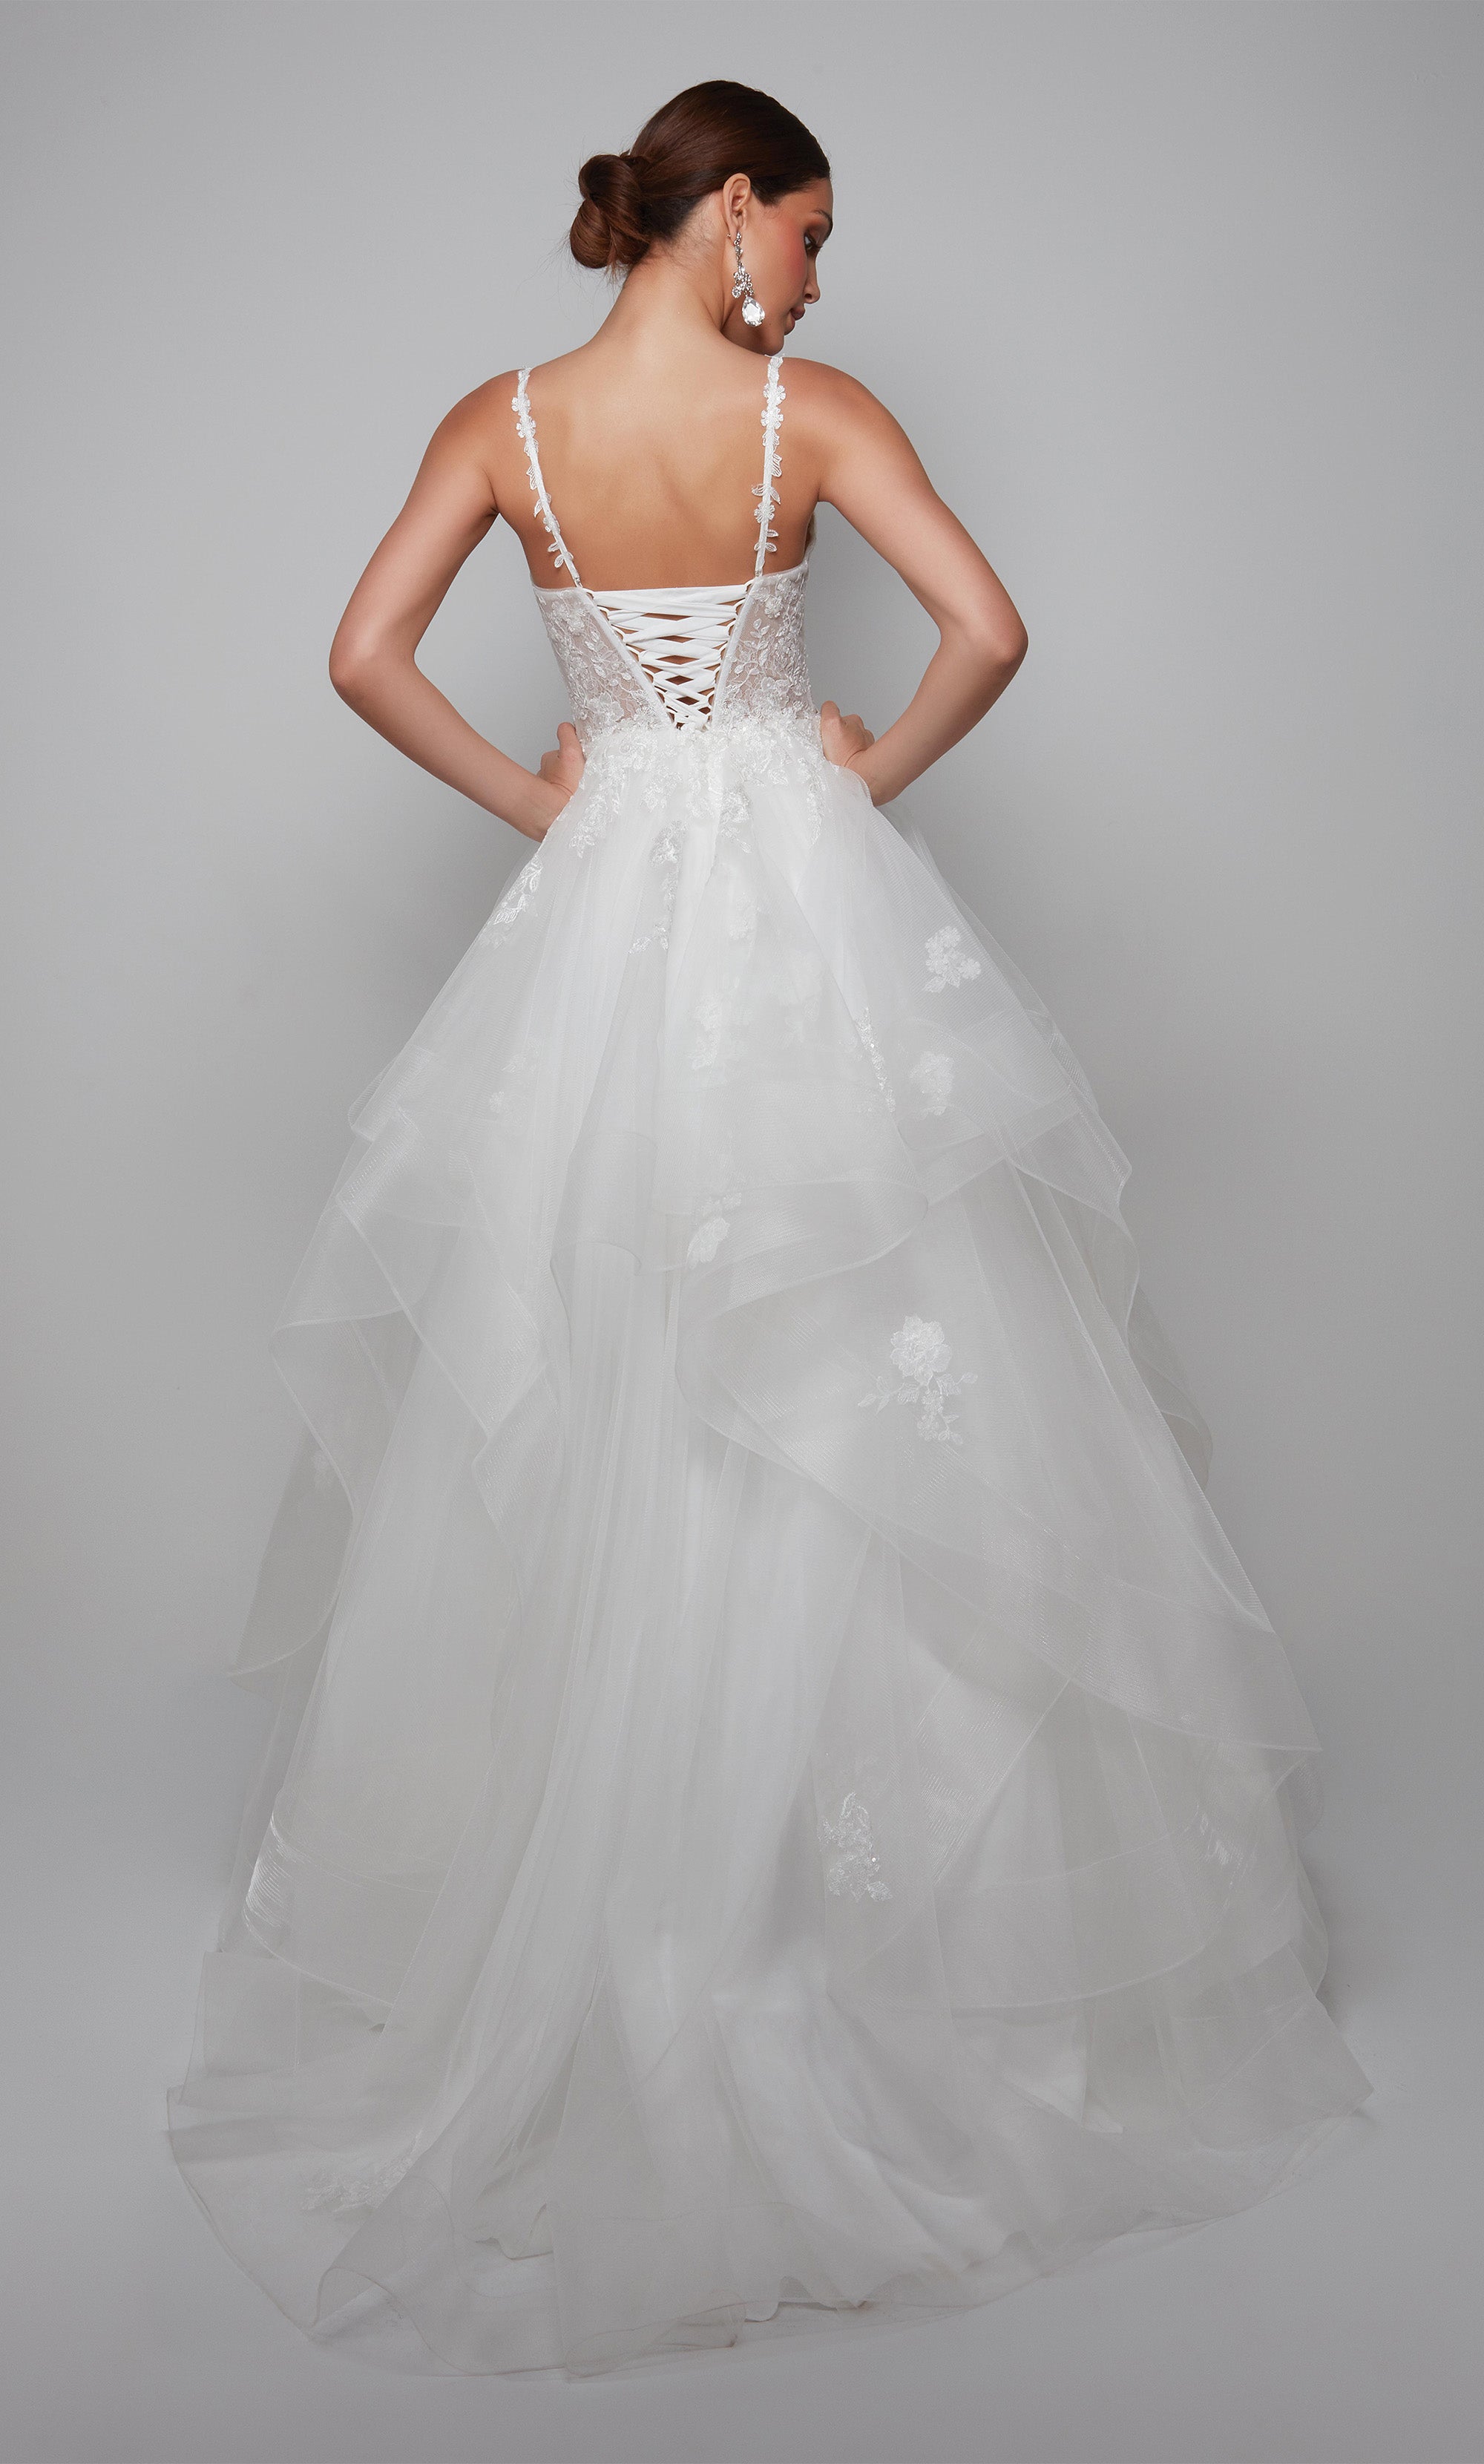 Plunging floral lace applique wedding dress with a sheer bodice and layered skirt in ivory. Color-SWATCH_7080__IVORY